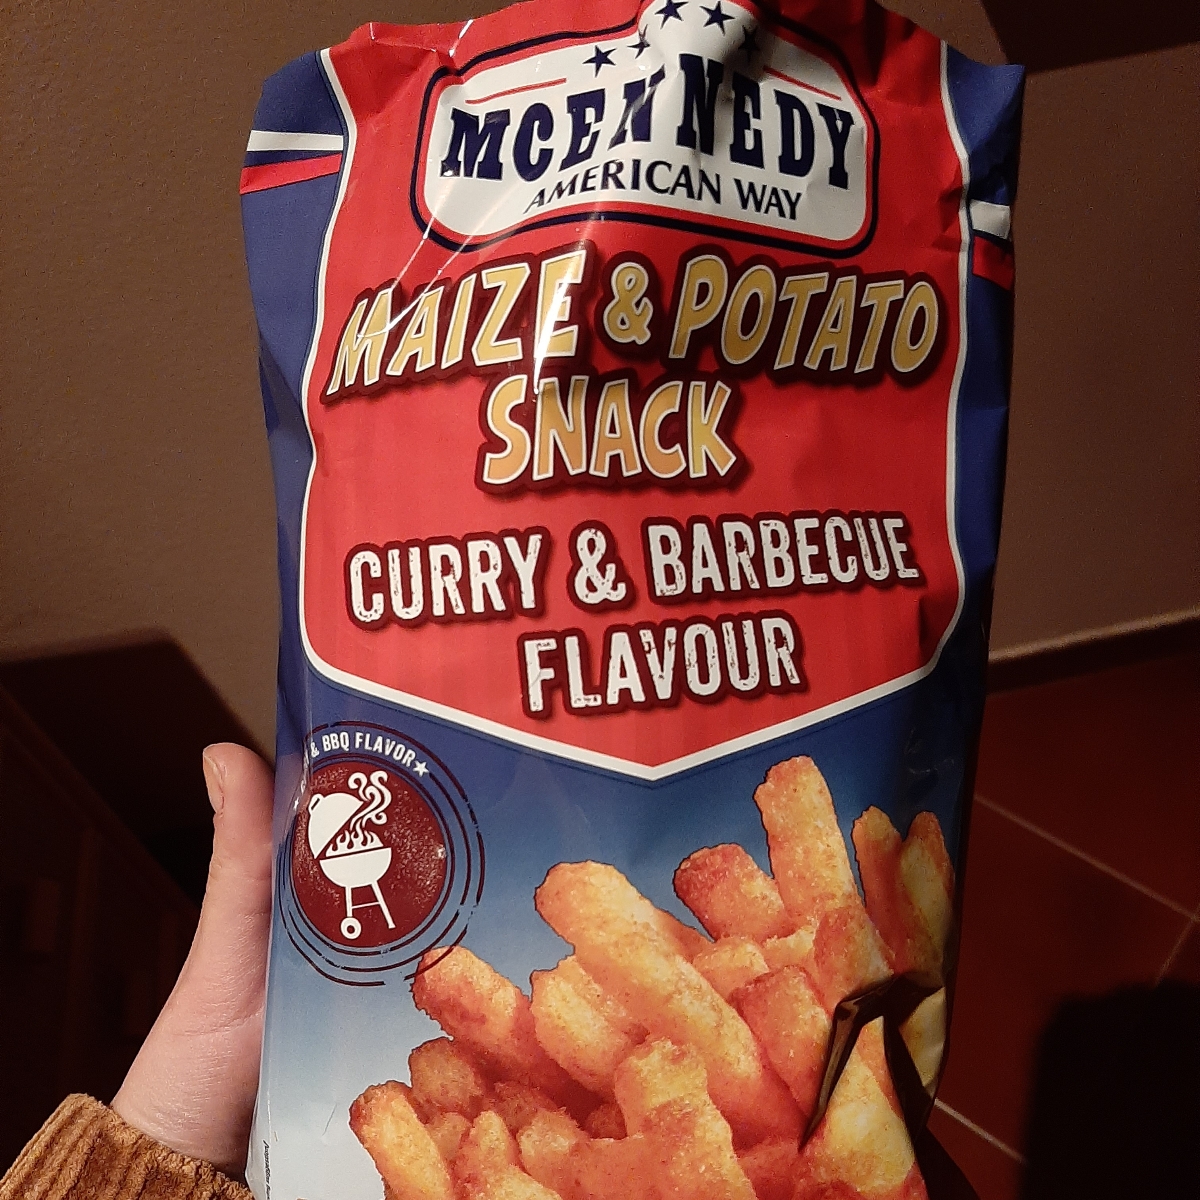 Mcennedy Maize and potato snack Curry and Barbecue flavor Review | abillion